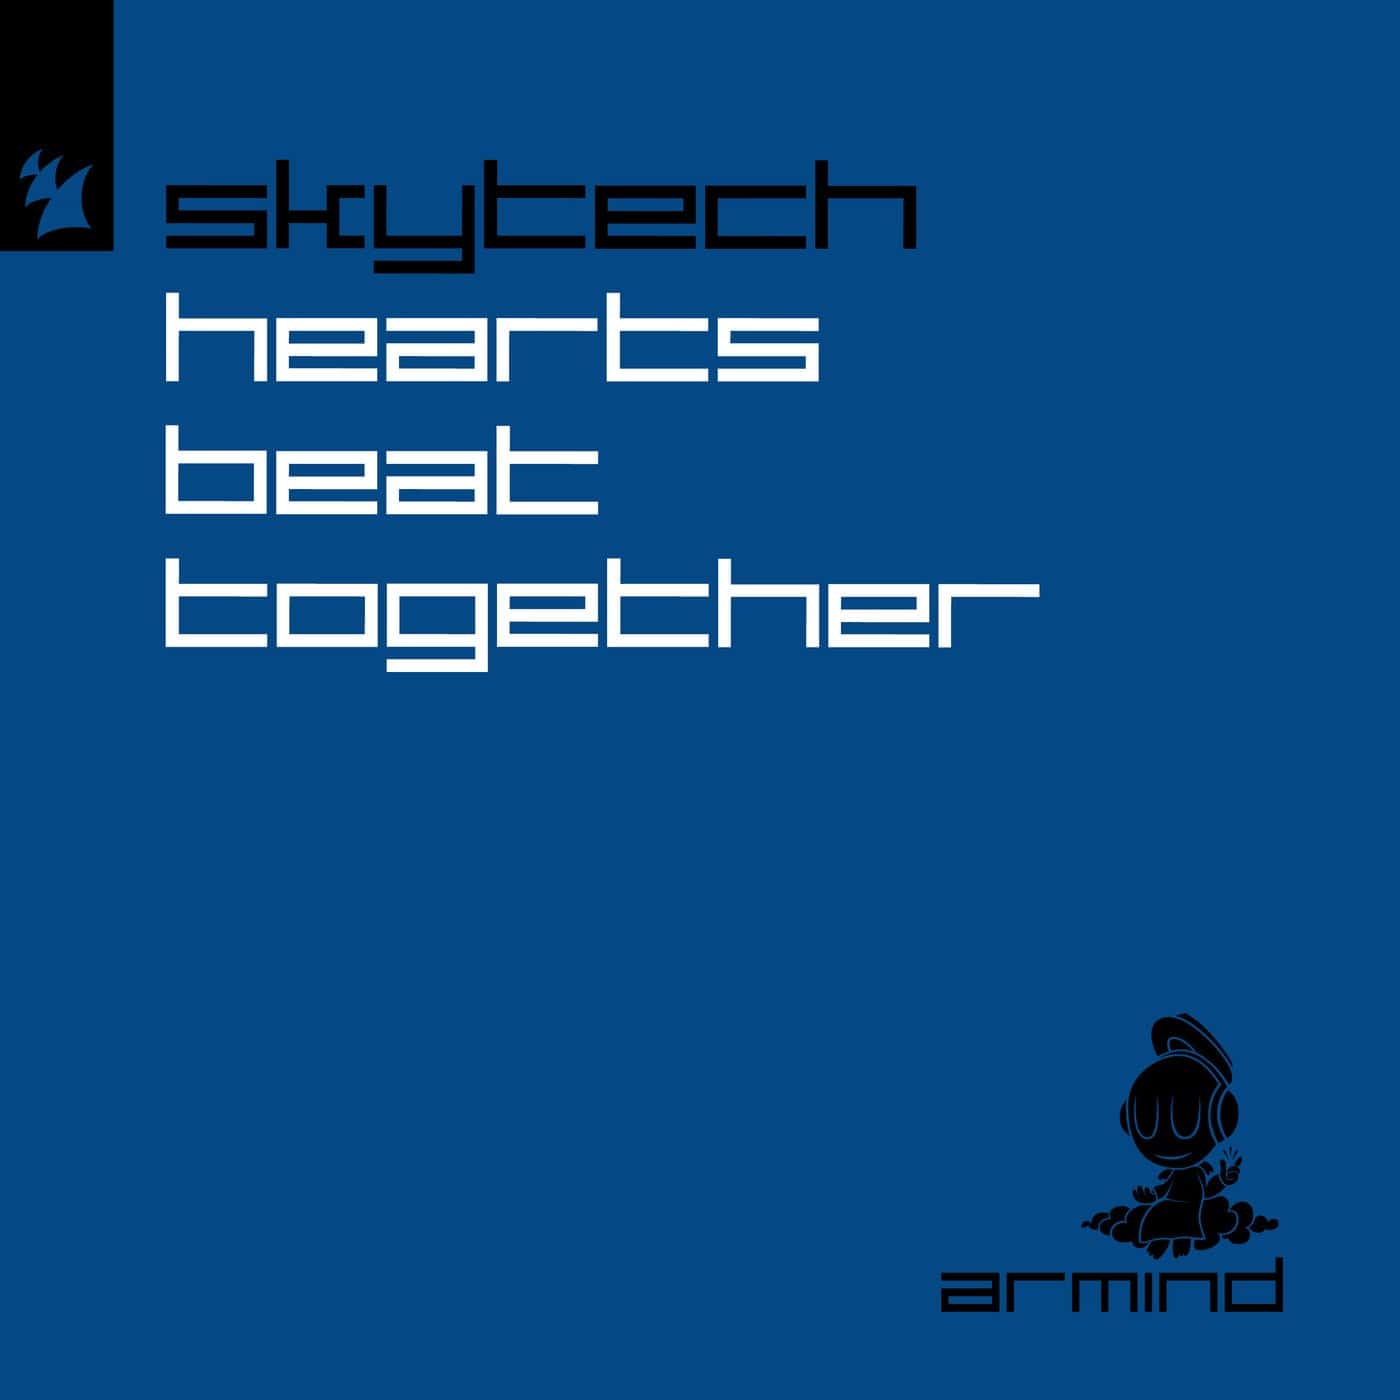 Release Cover: Hearts Beat Together Download Free on Electrobuzz